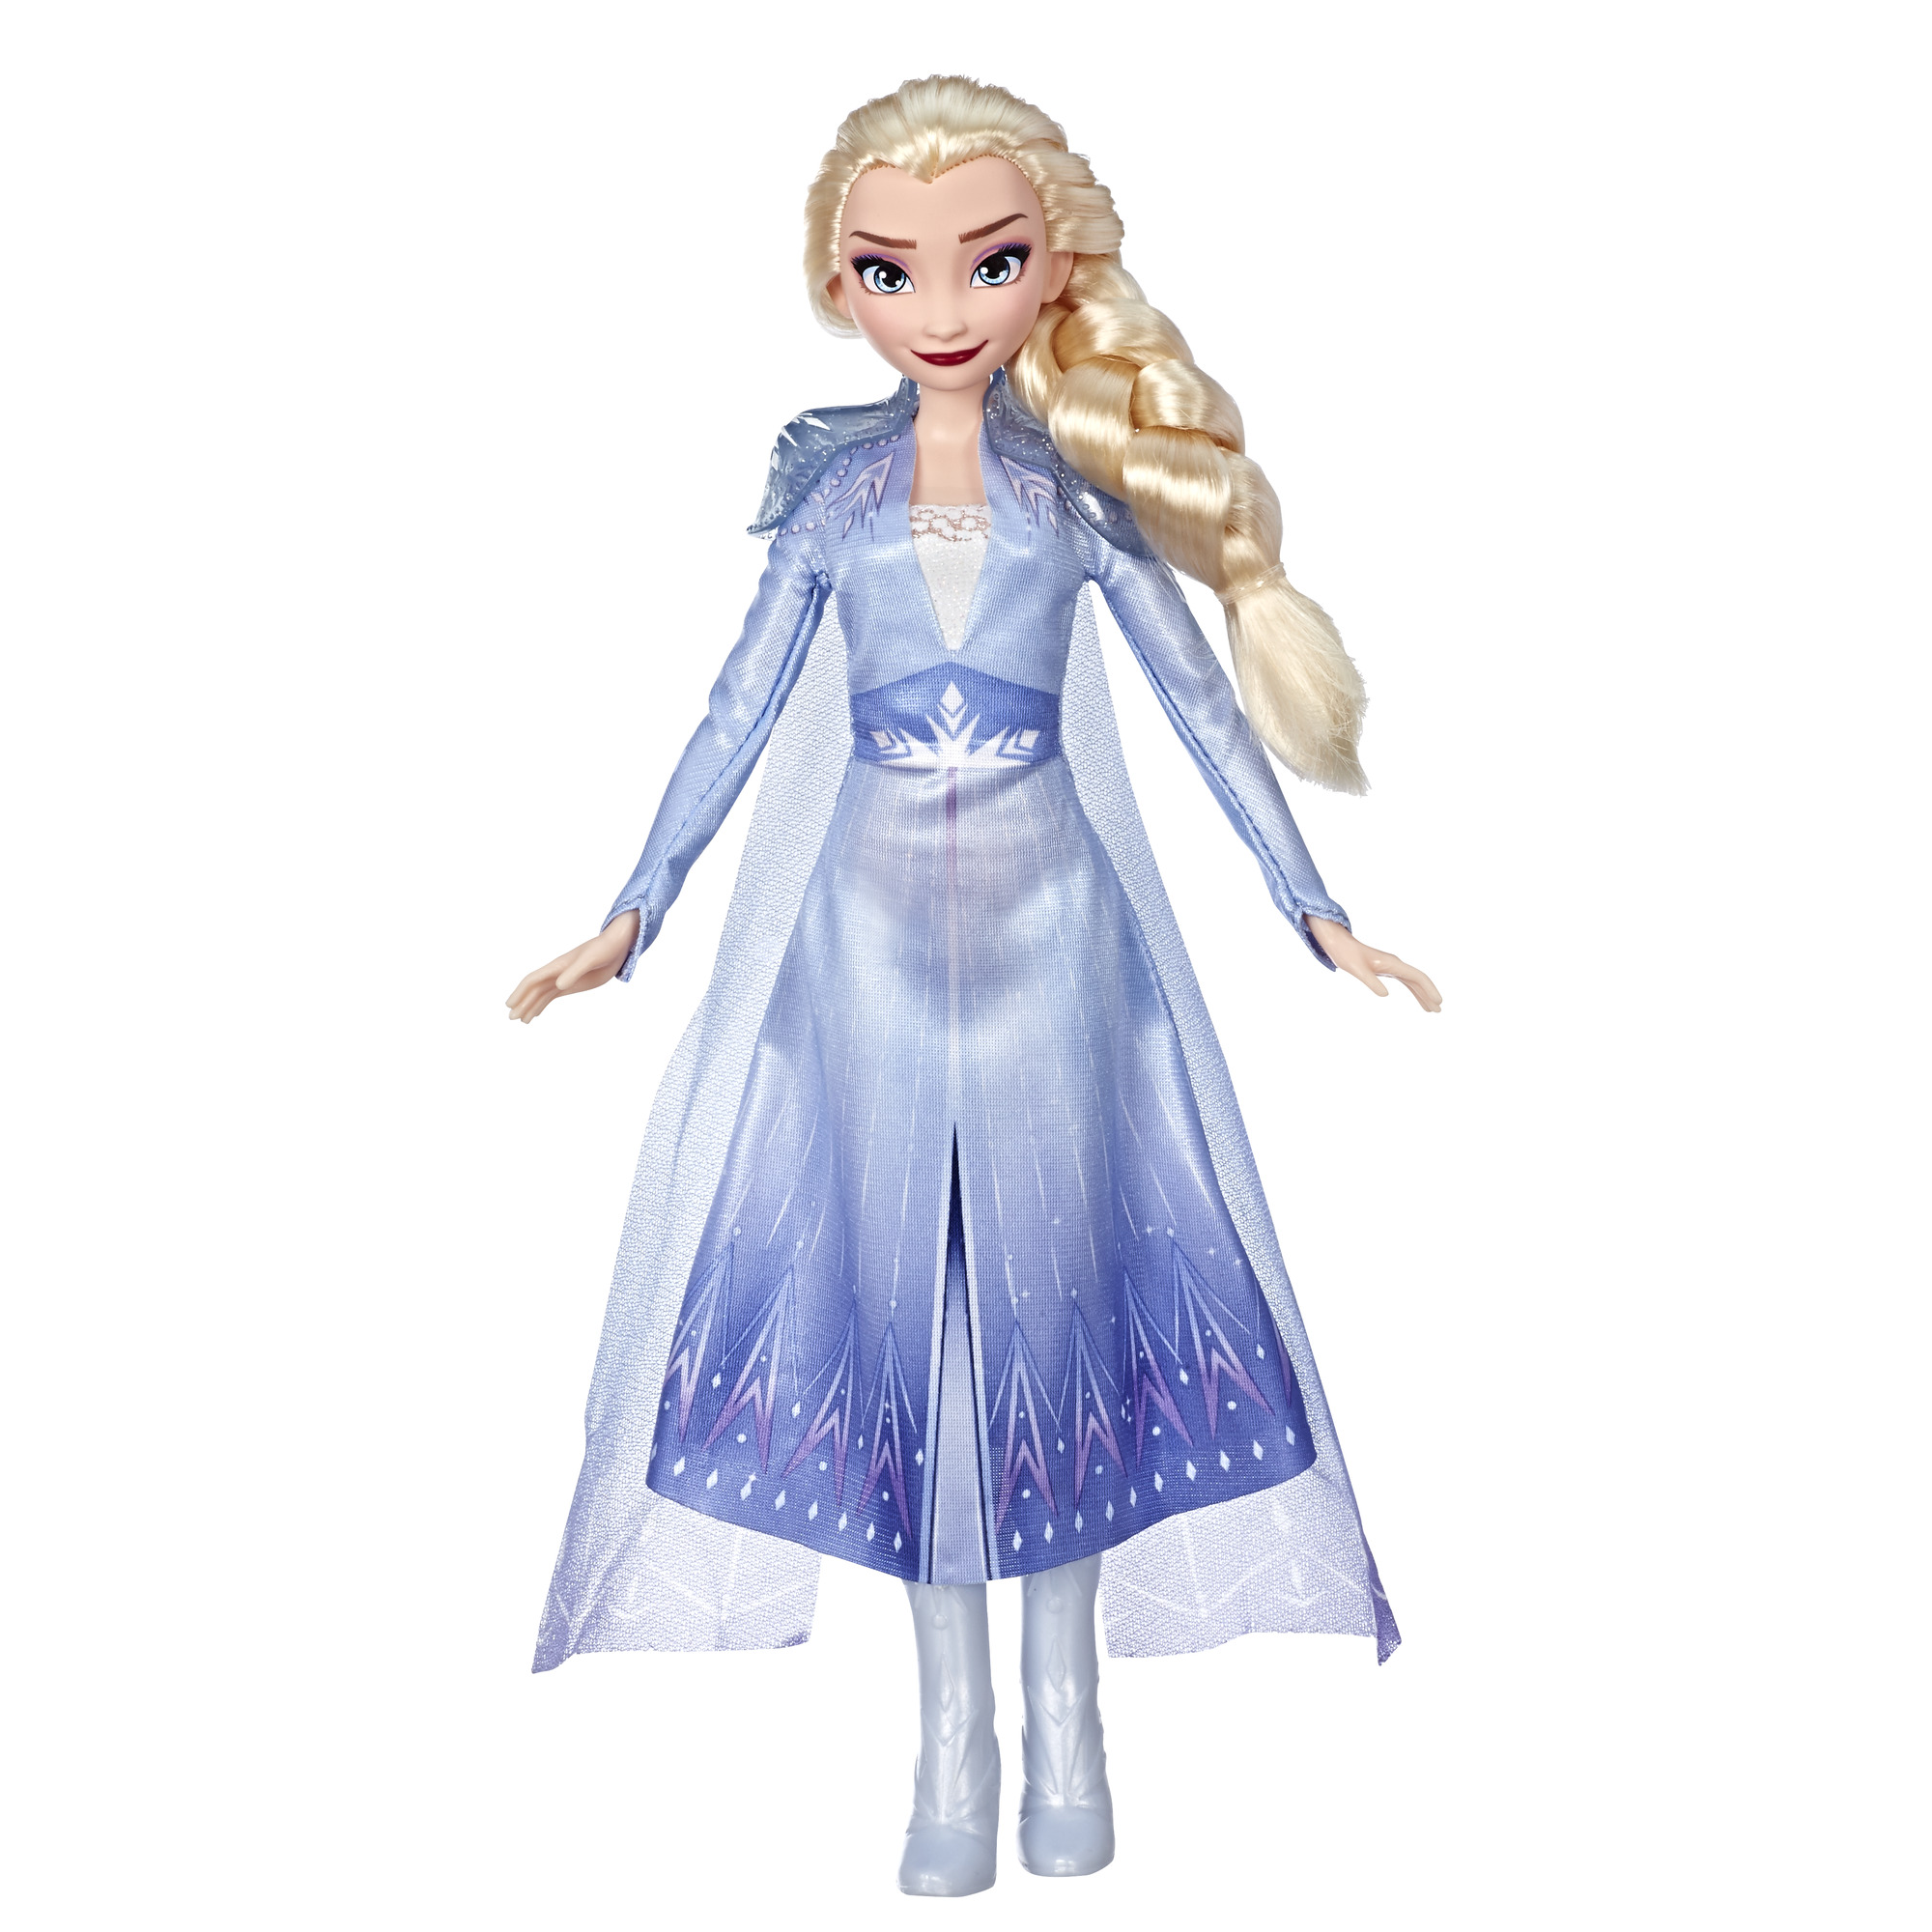 Disney Frozen Elsa Fashion Doll With Long Blonde Hair and Blue Outfit Inspired by Frozen 2 - image 1 of 3